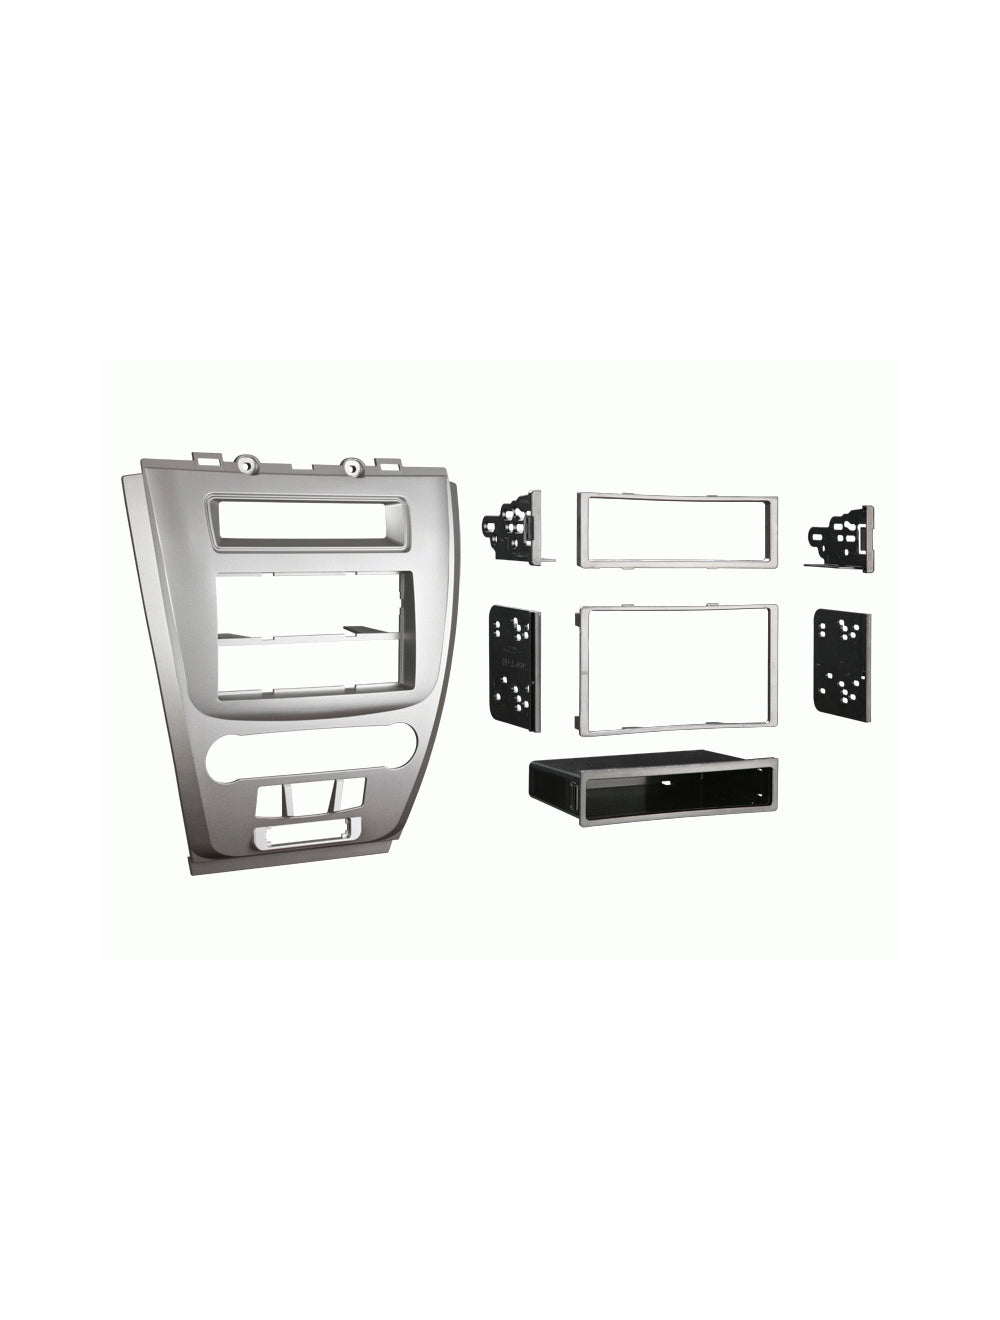 Metra 99-5821S Single or Double DIN Installation Dash Kit for 2010-2011 Ford Fusion and Mercury Milan Silver